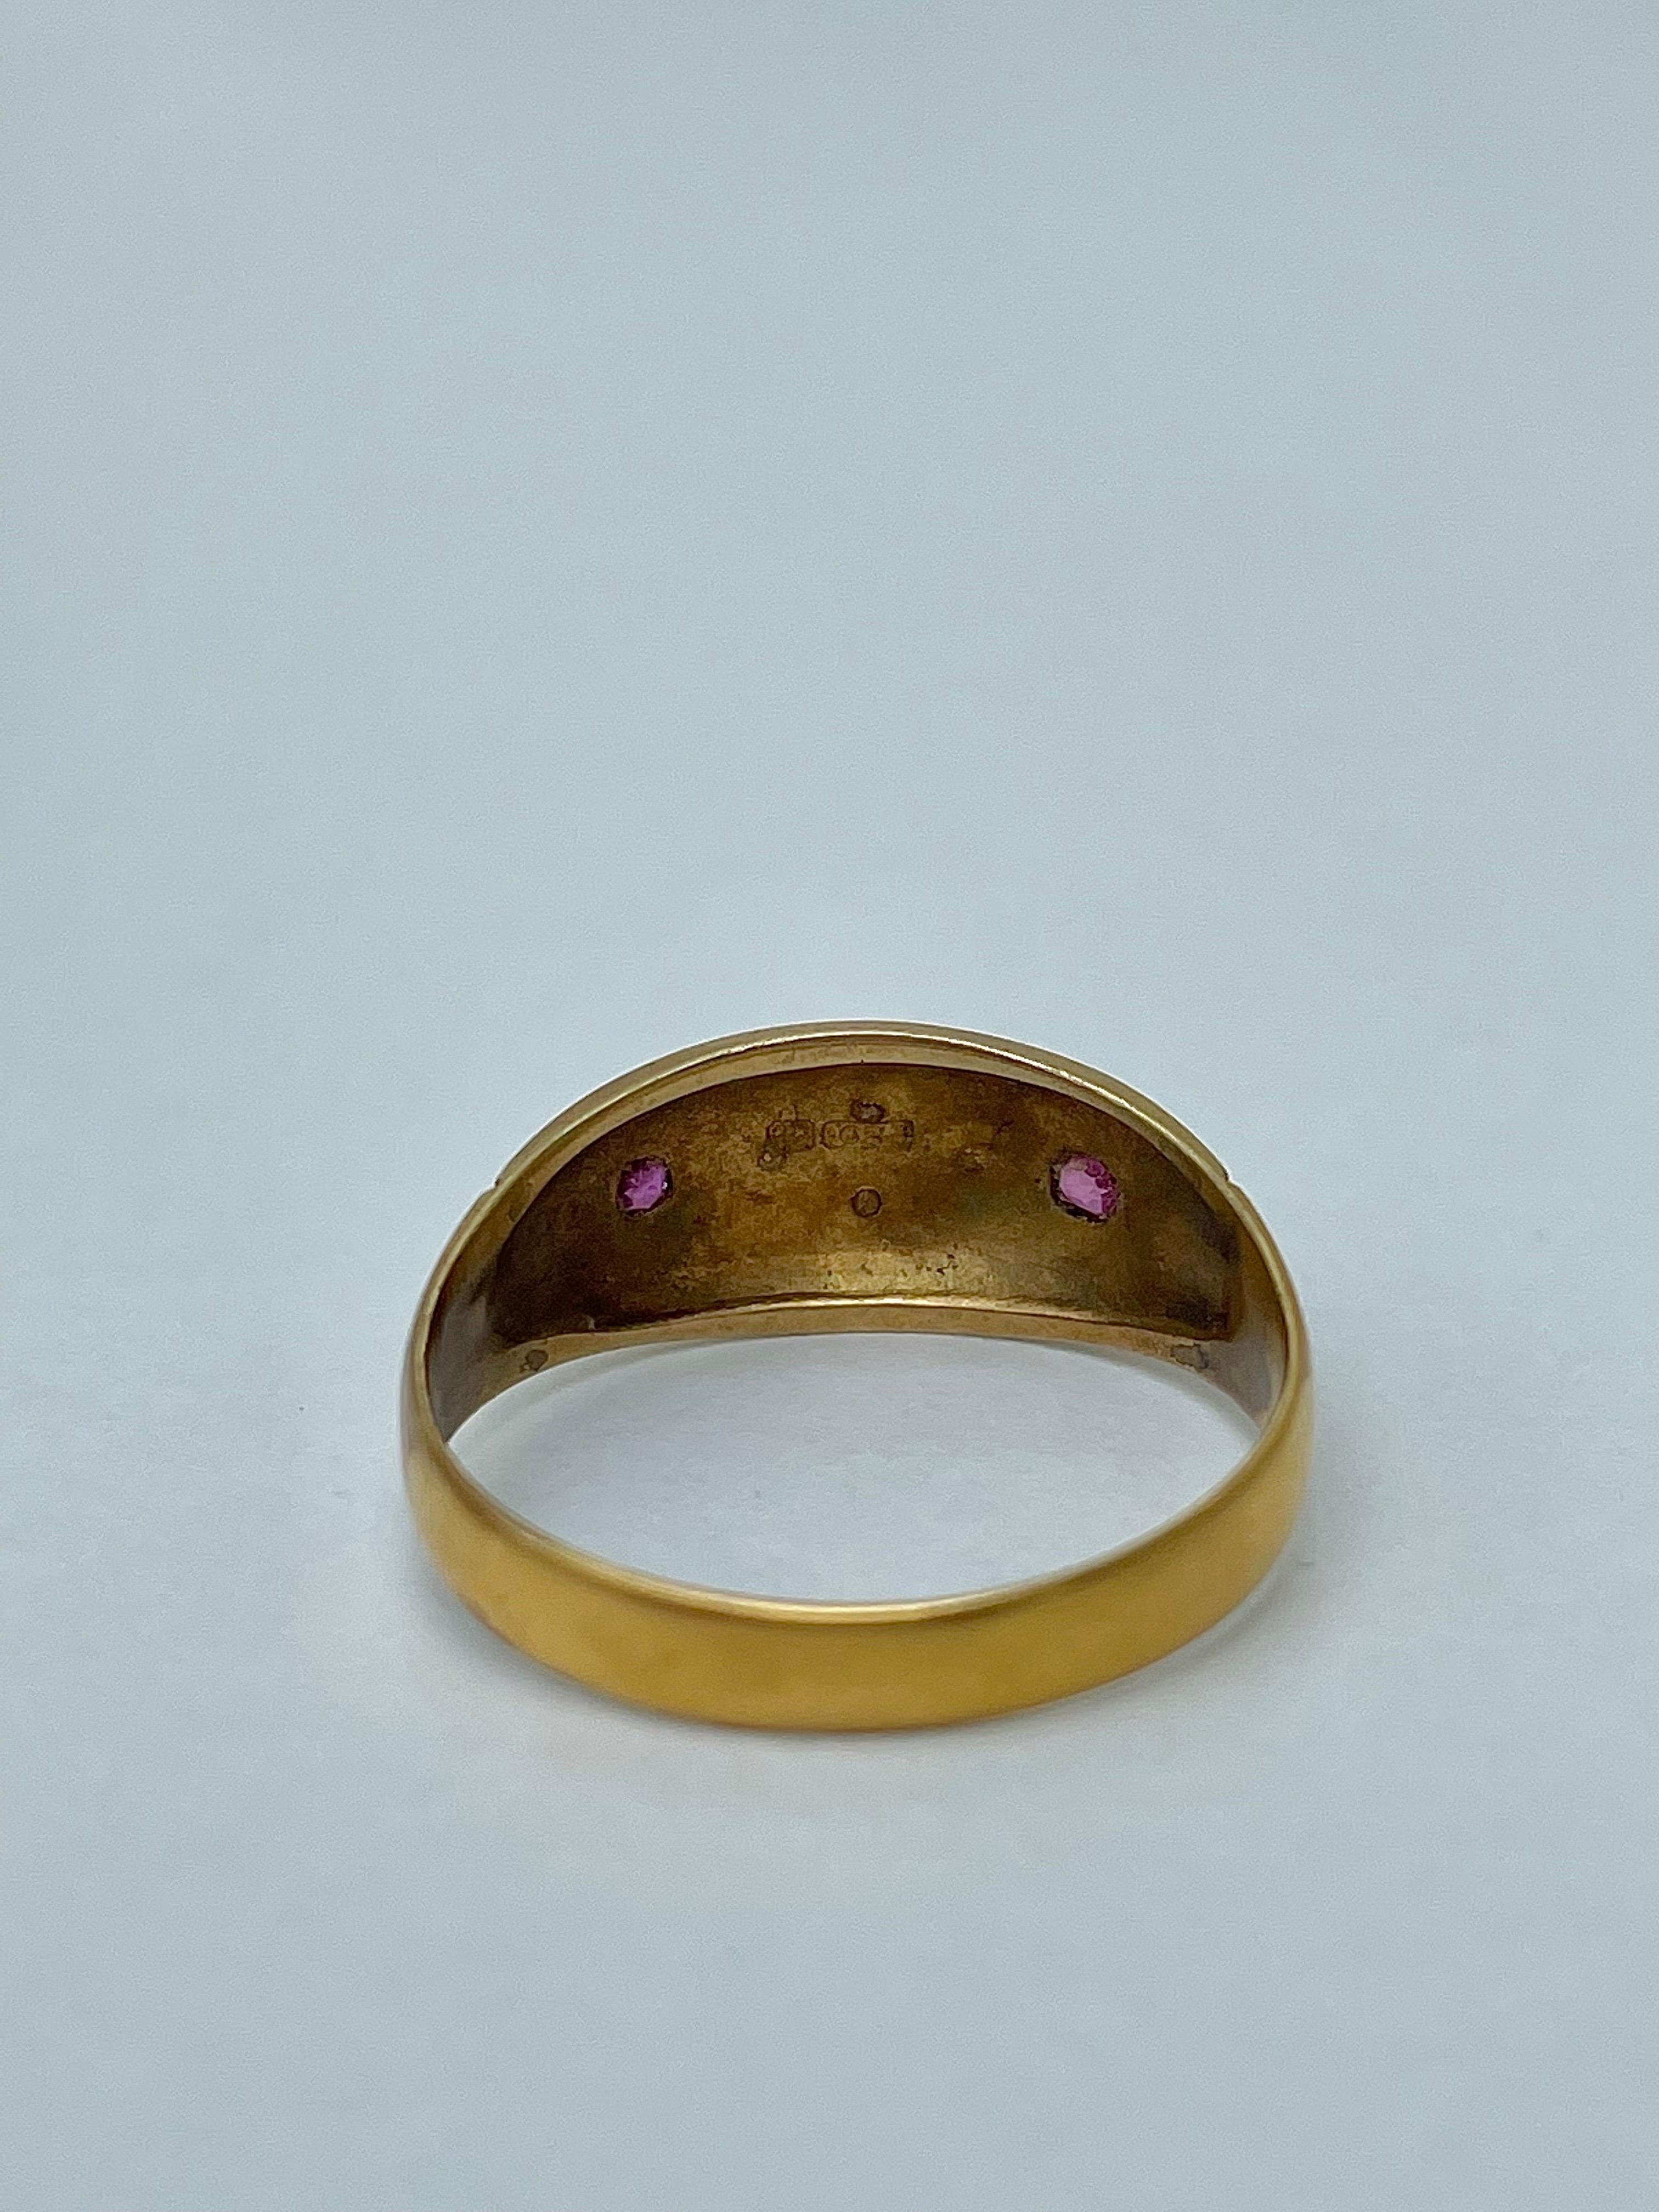 Victorian 15ct Yellow Gold Ruby and Pearl Ring

most beautiful pearl and ruby detailed ring 

The item comes without the box in the photos but will be presented in a gift box

Measurements: weight 2.73g, size UK W, head of ring 16.7mm x 8.3mm,